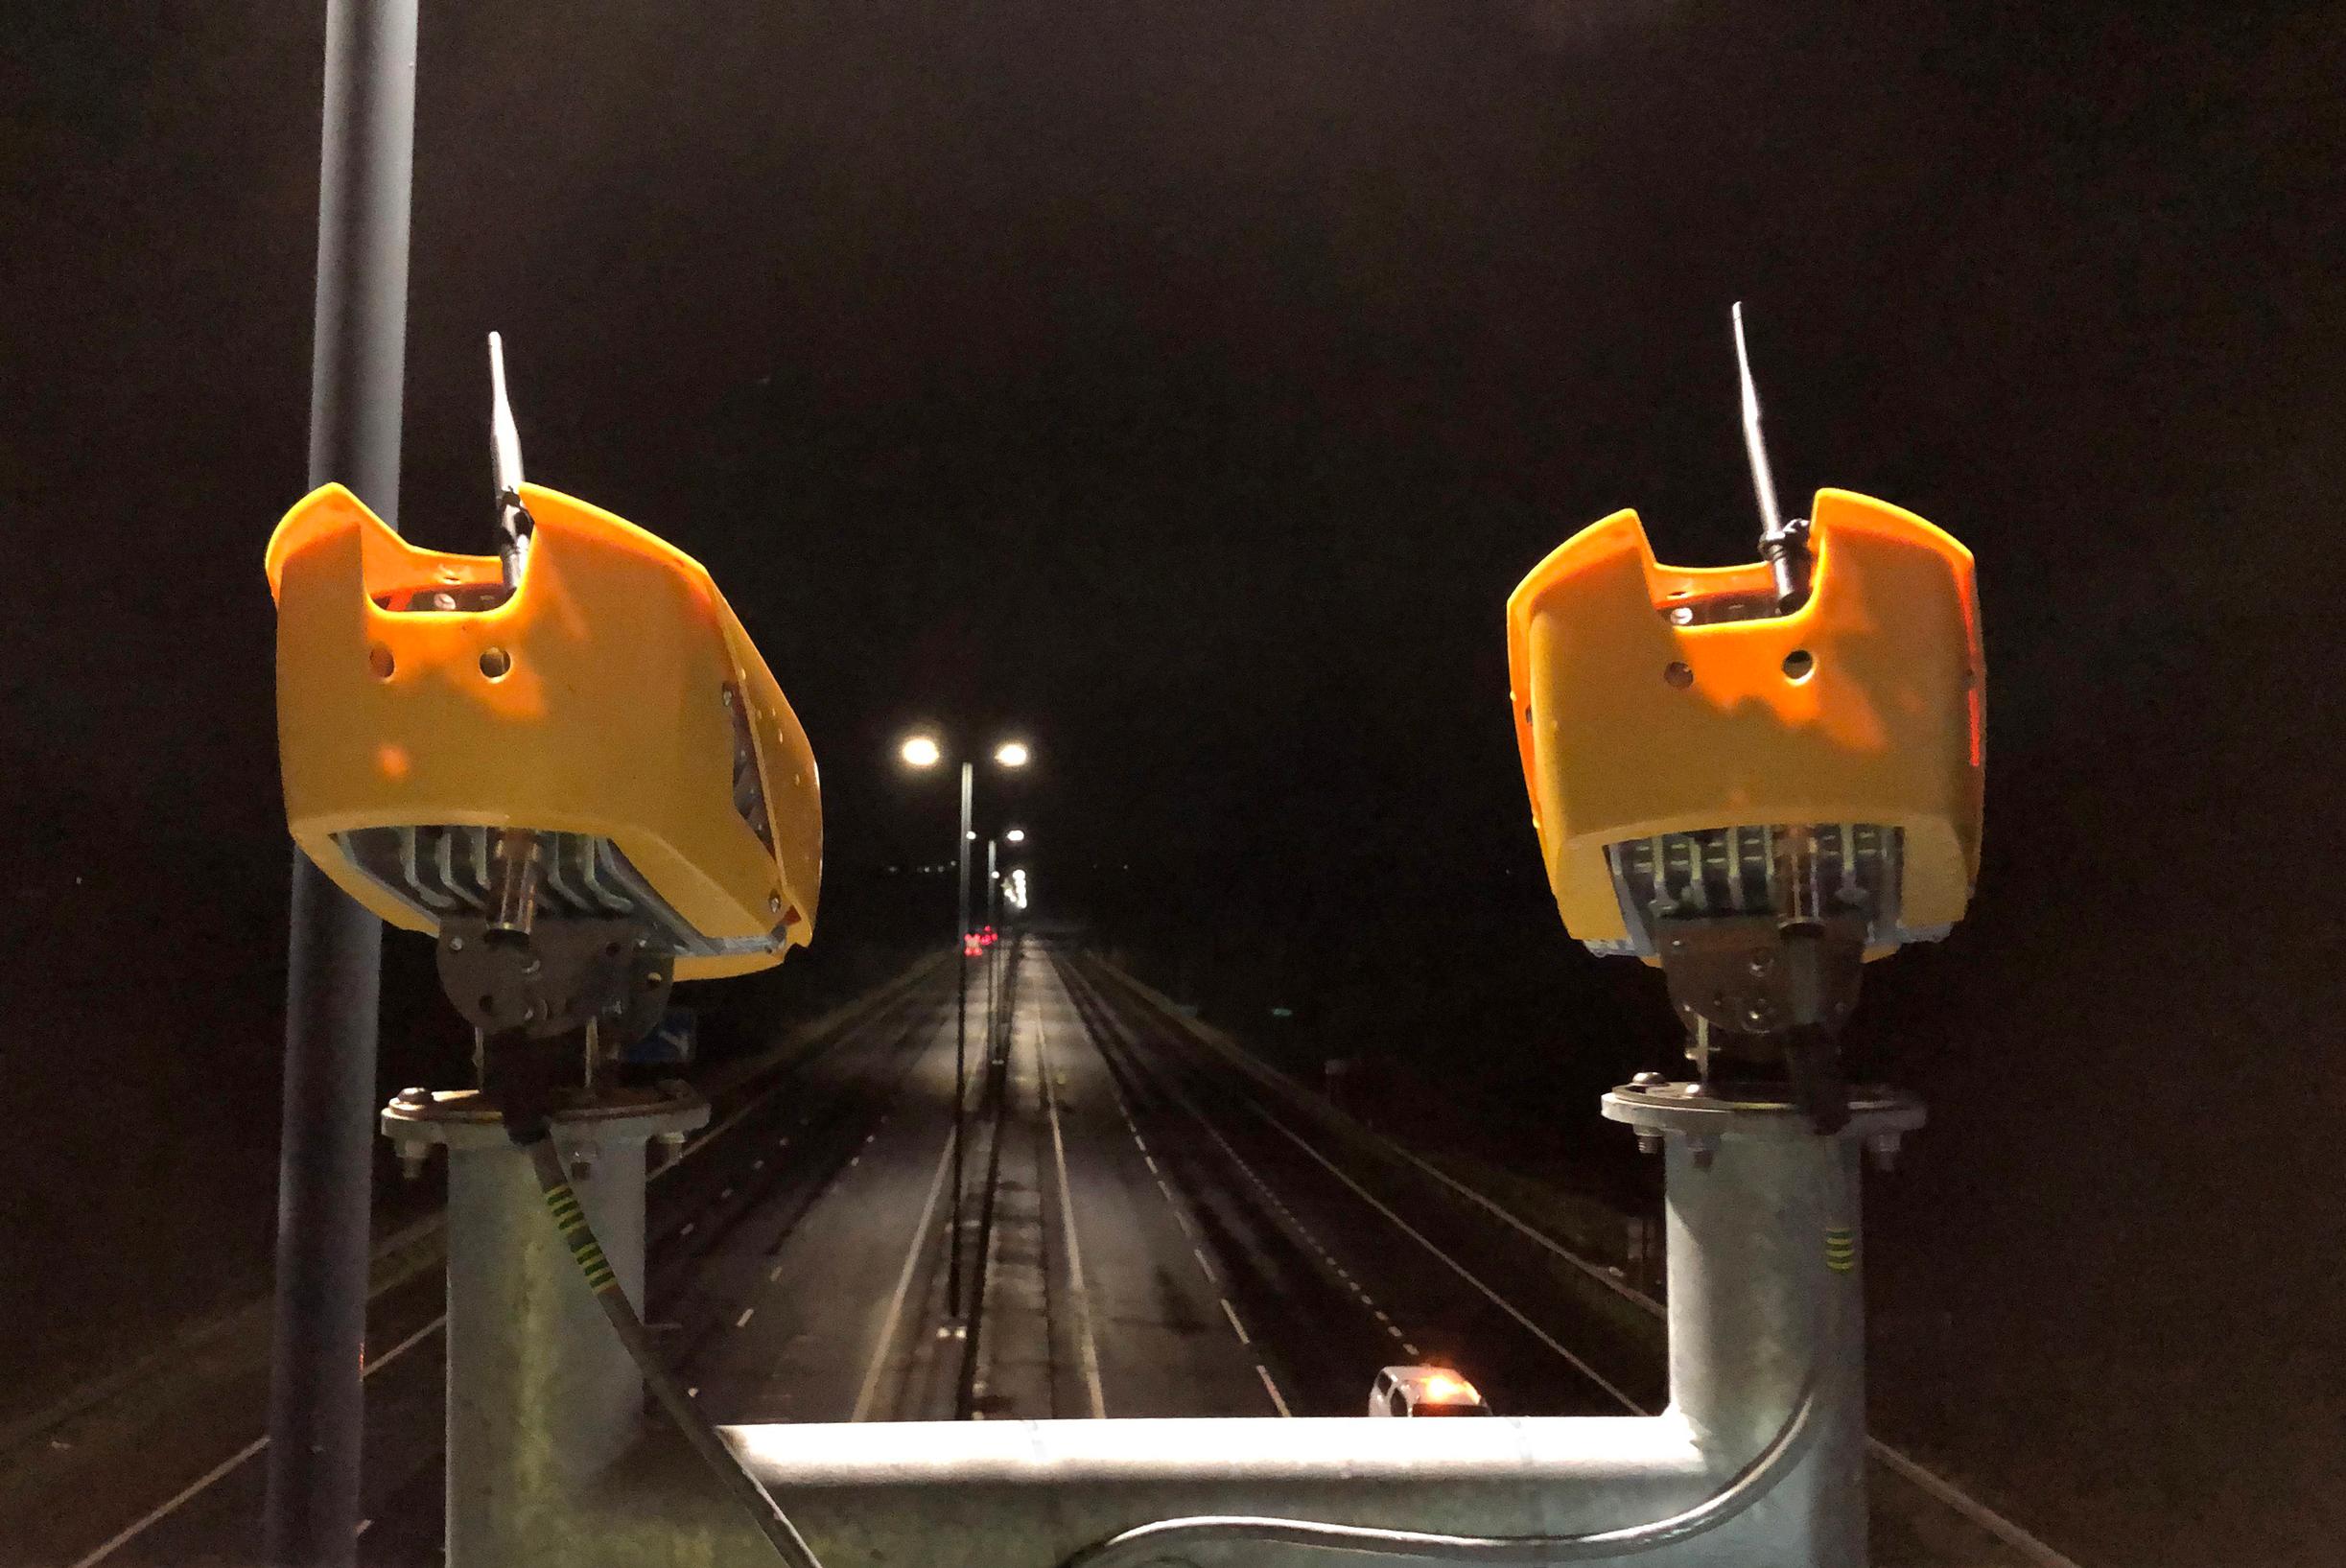 The gantry view of Jenoptik’s average speed cameras on the M4